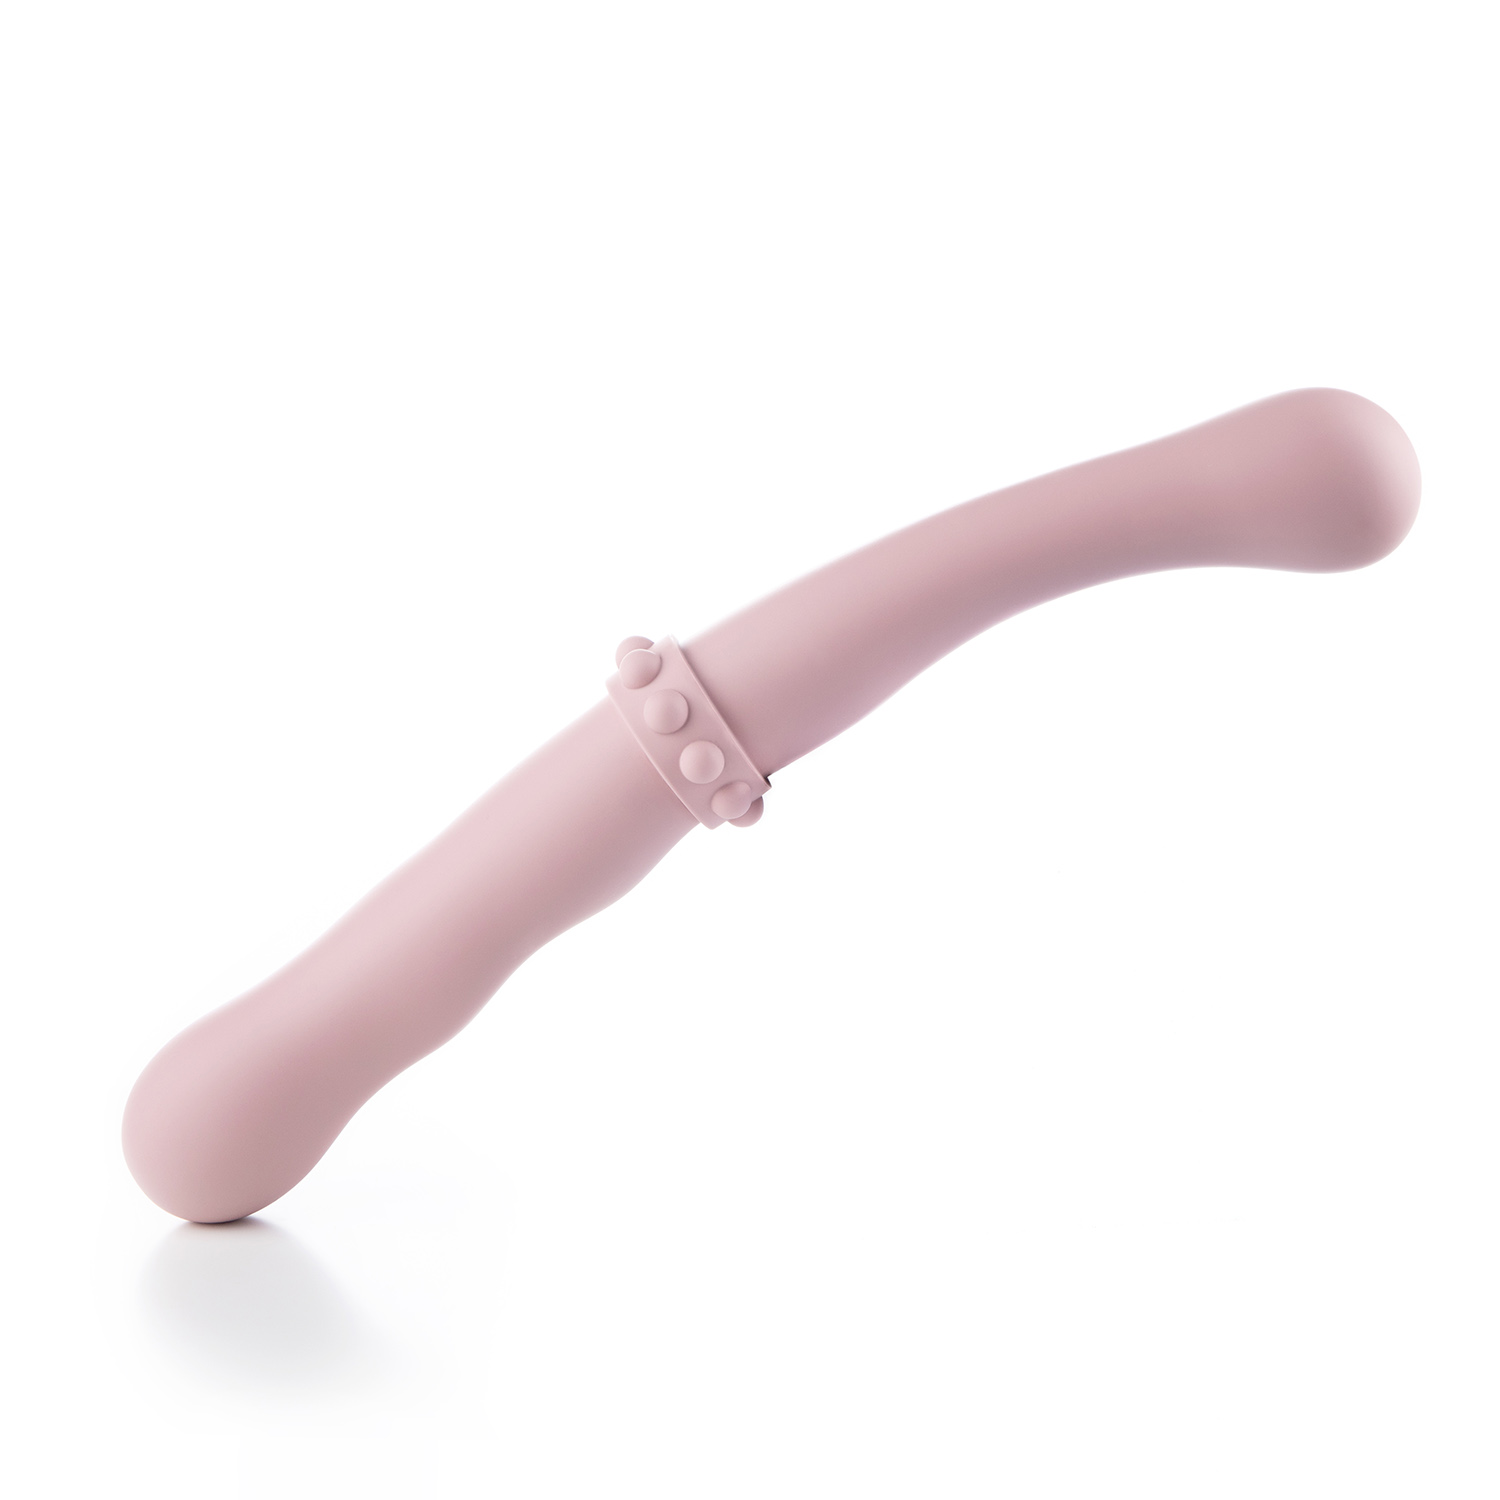 CLASSIC SMOOTH DOUBLE ENDED DILDO INTIMACY IN PINK